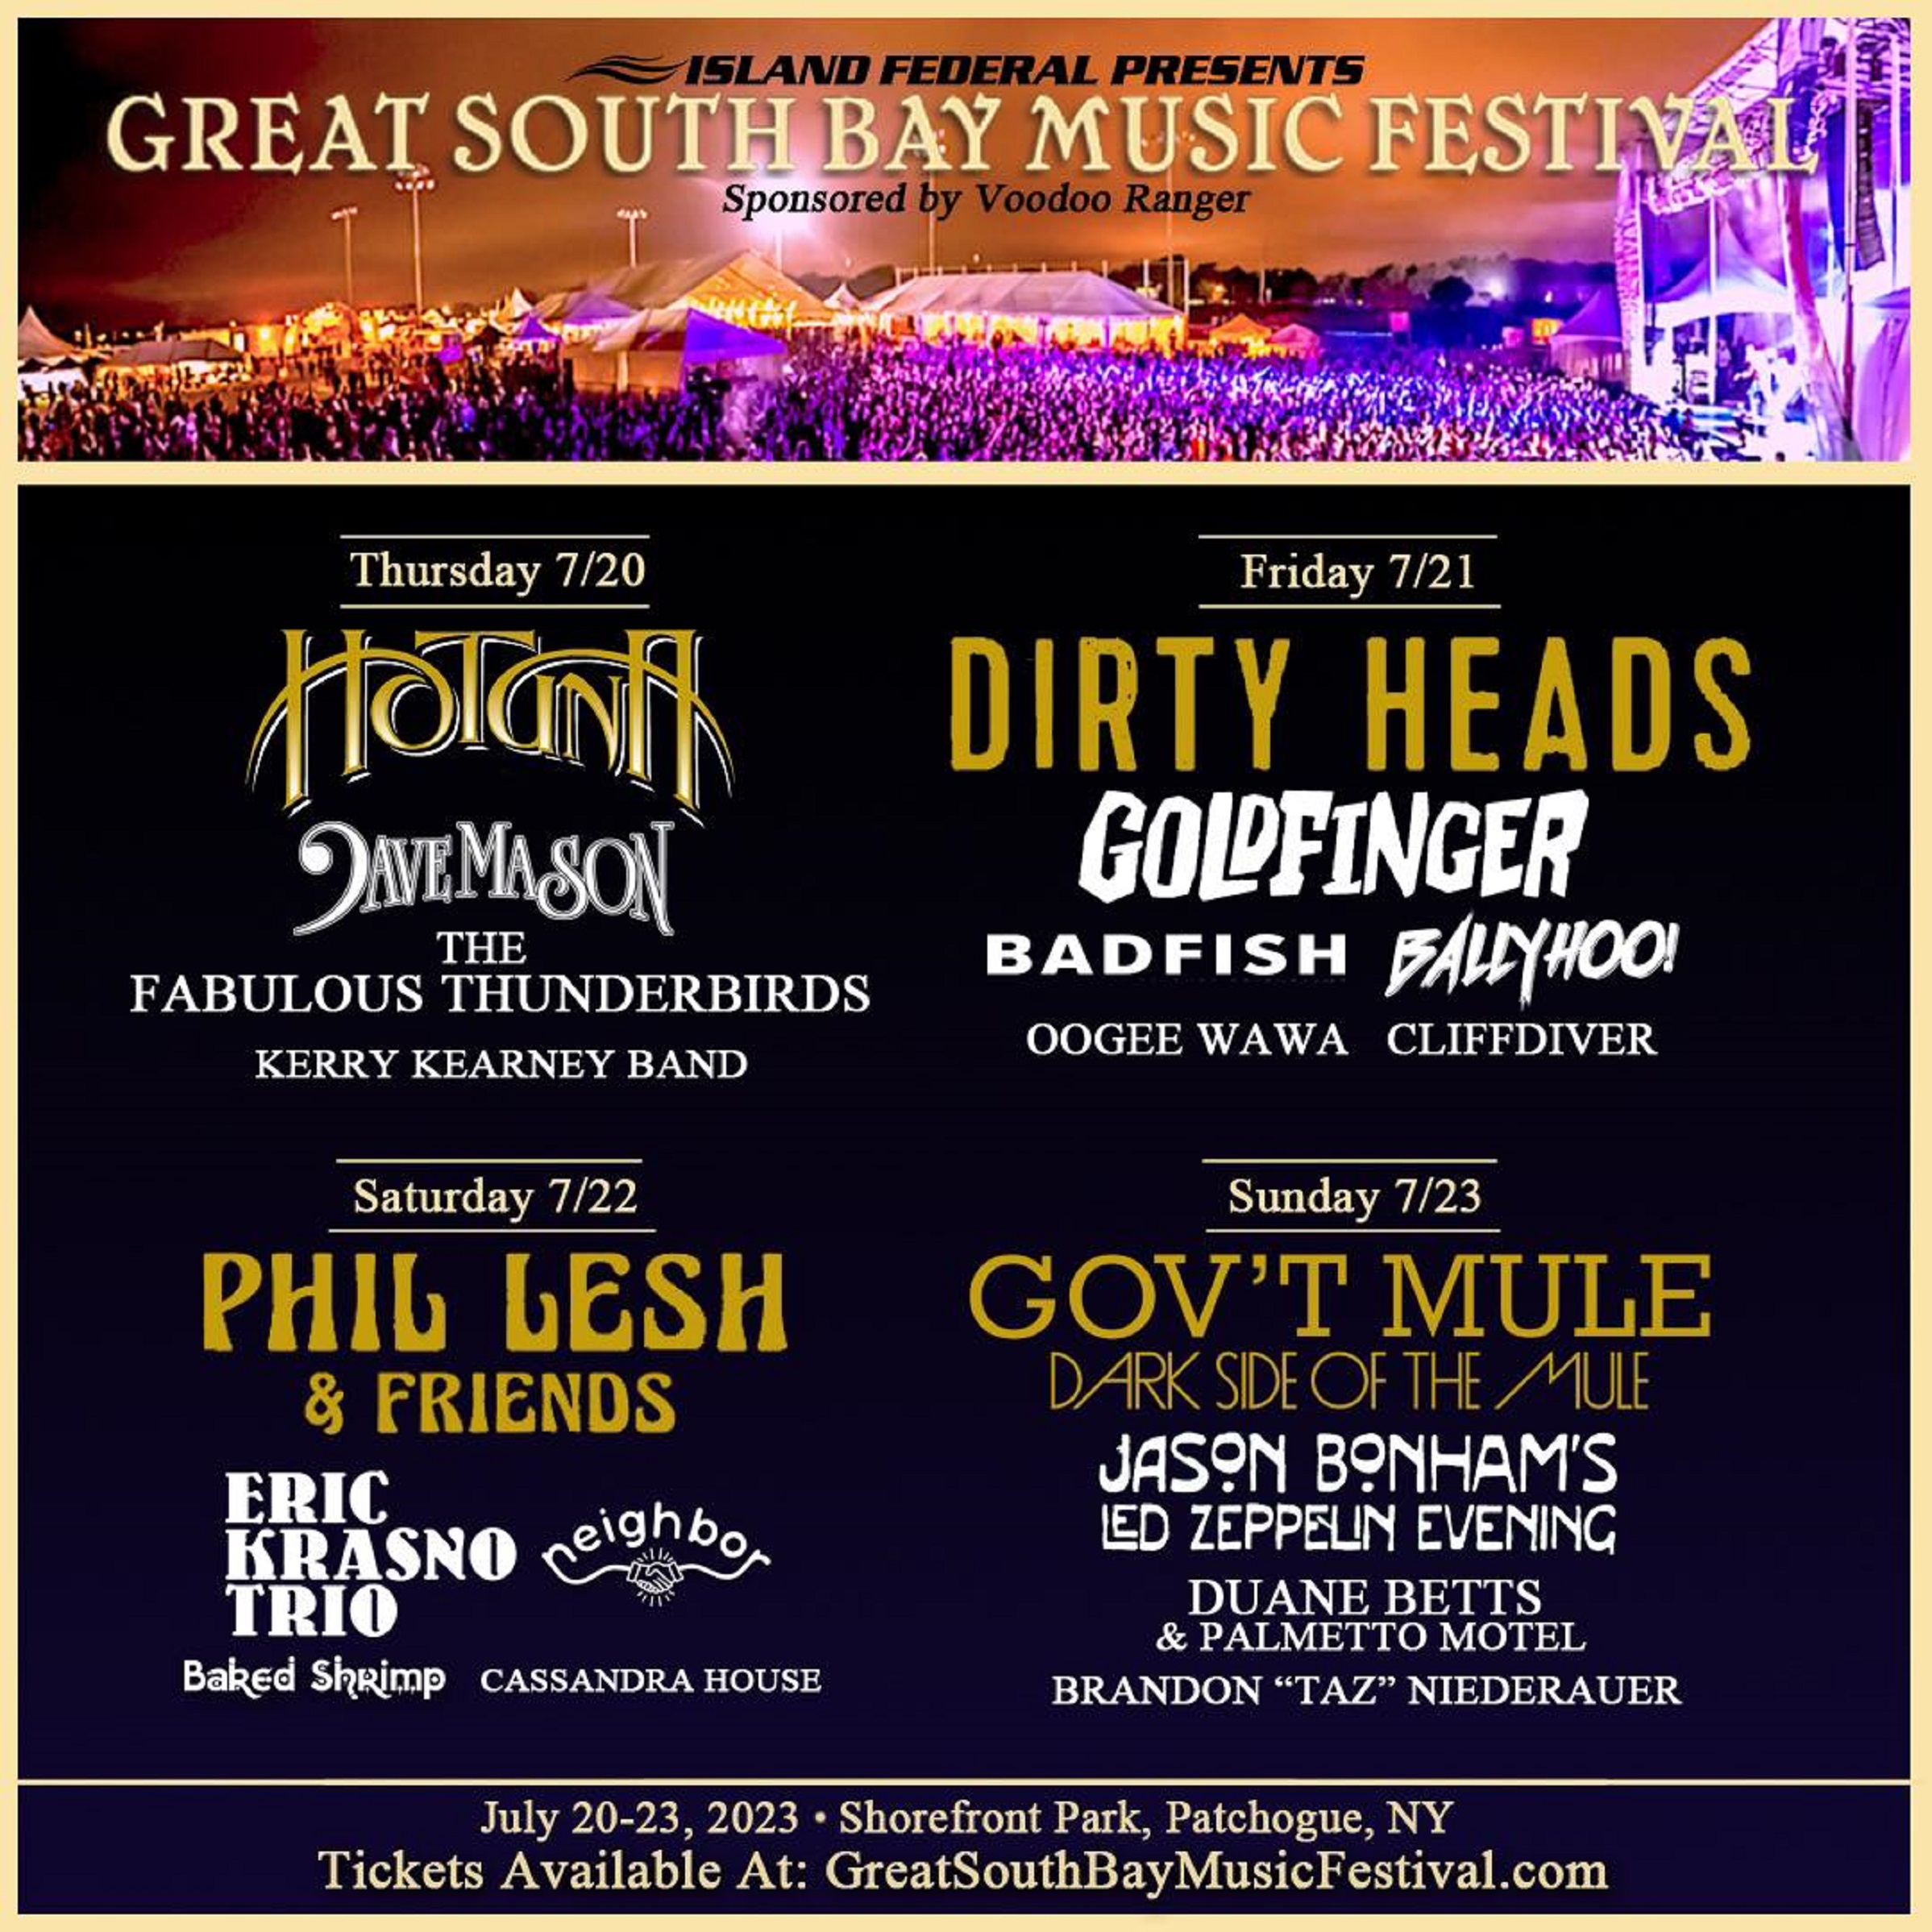 THE GREAT SOUTH BAY MUSIC FESTIVAL ANNOUNCES Phil Lesh, Gov't Mule, Hot Tuna, Dave Mason, and many more!